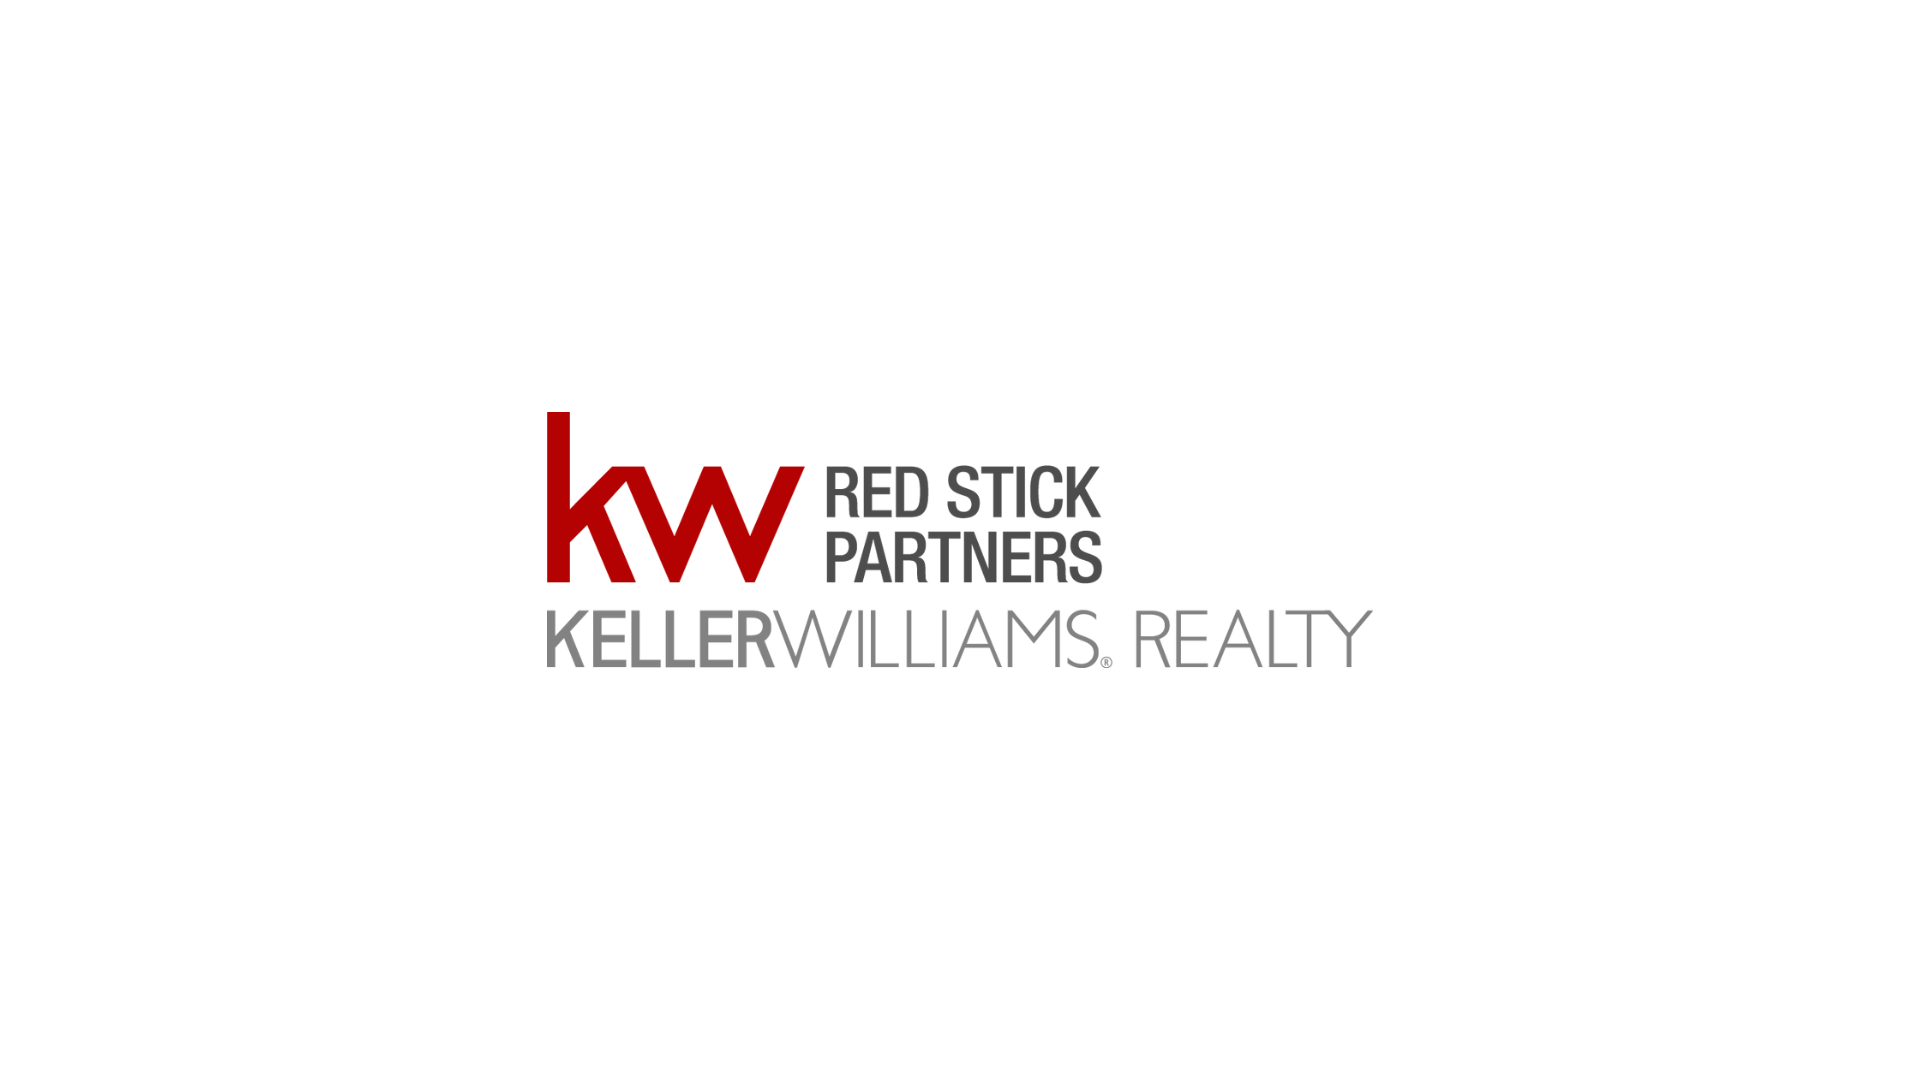 Keller Williams Realty Red Stick Partners - The #1 Brokerage in